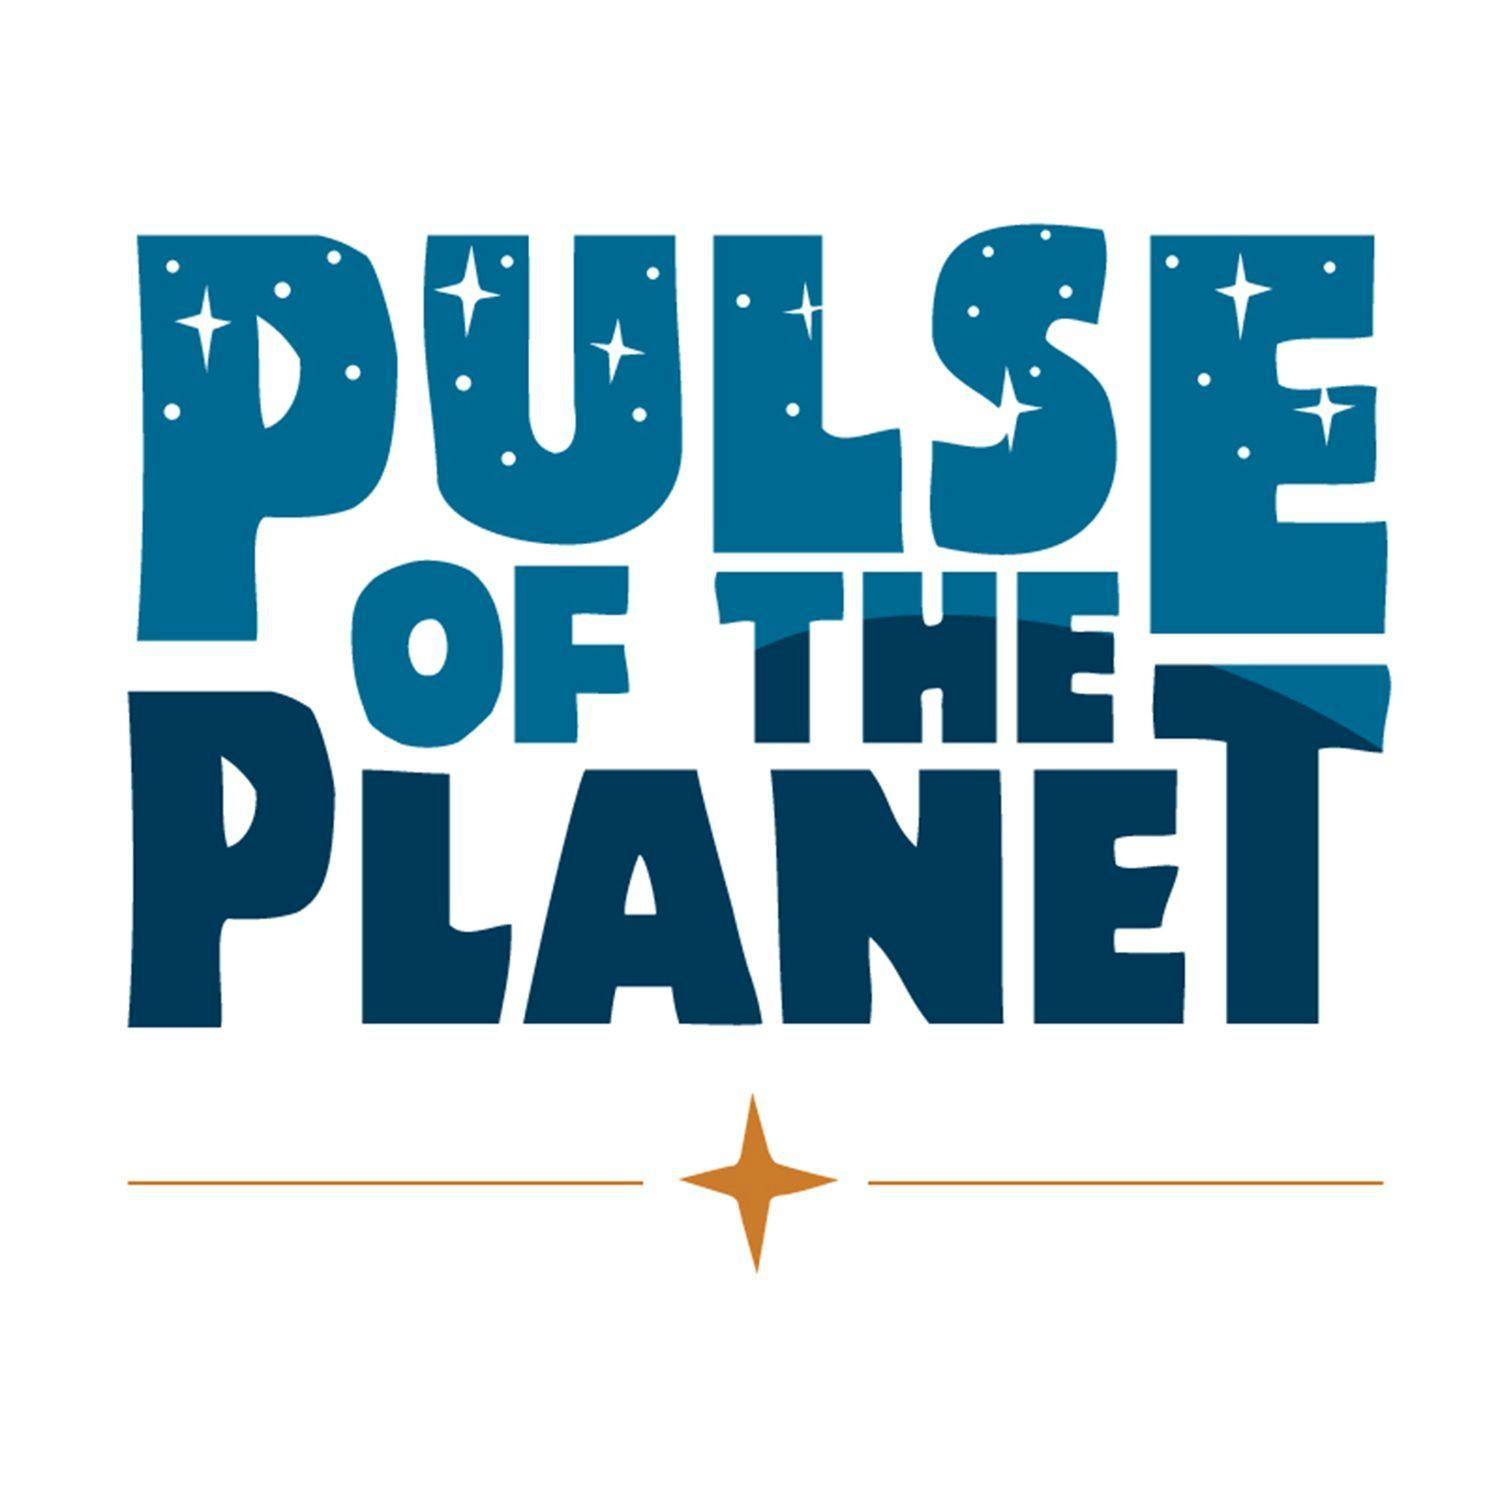 Pulse of the Planet Podcast with Jim Metzner | Science | Nature | Environment | Technology